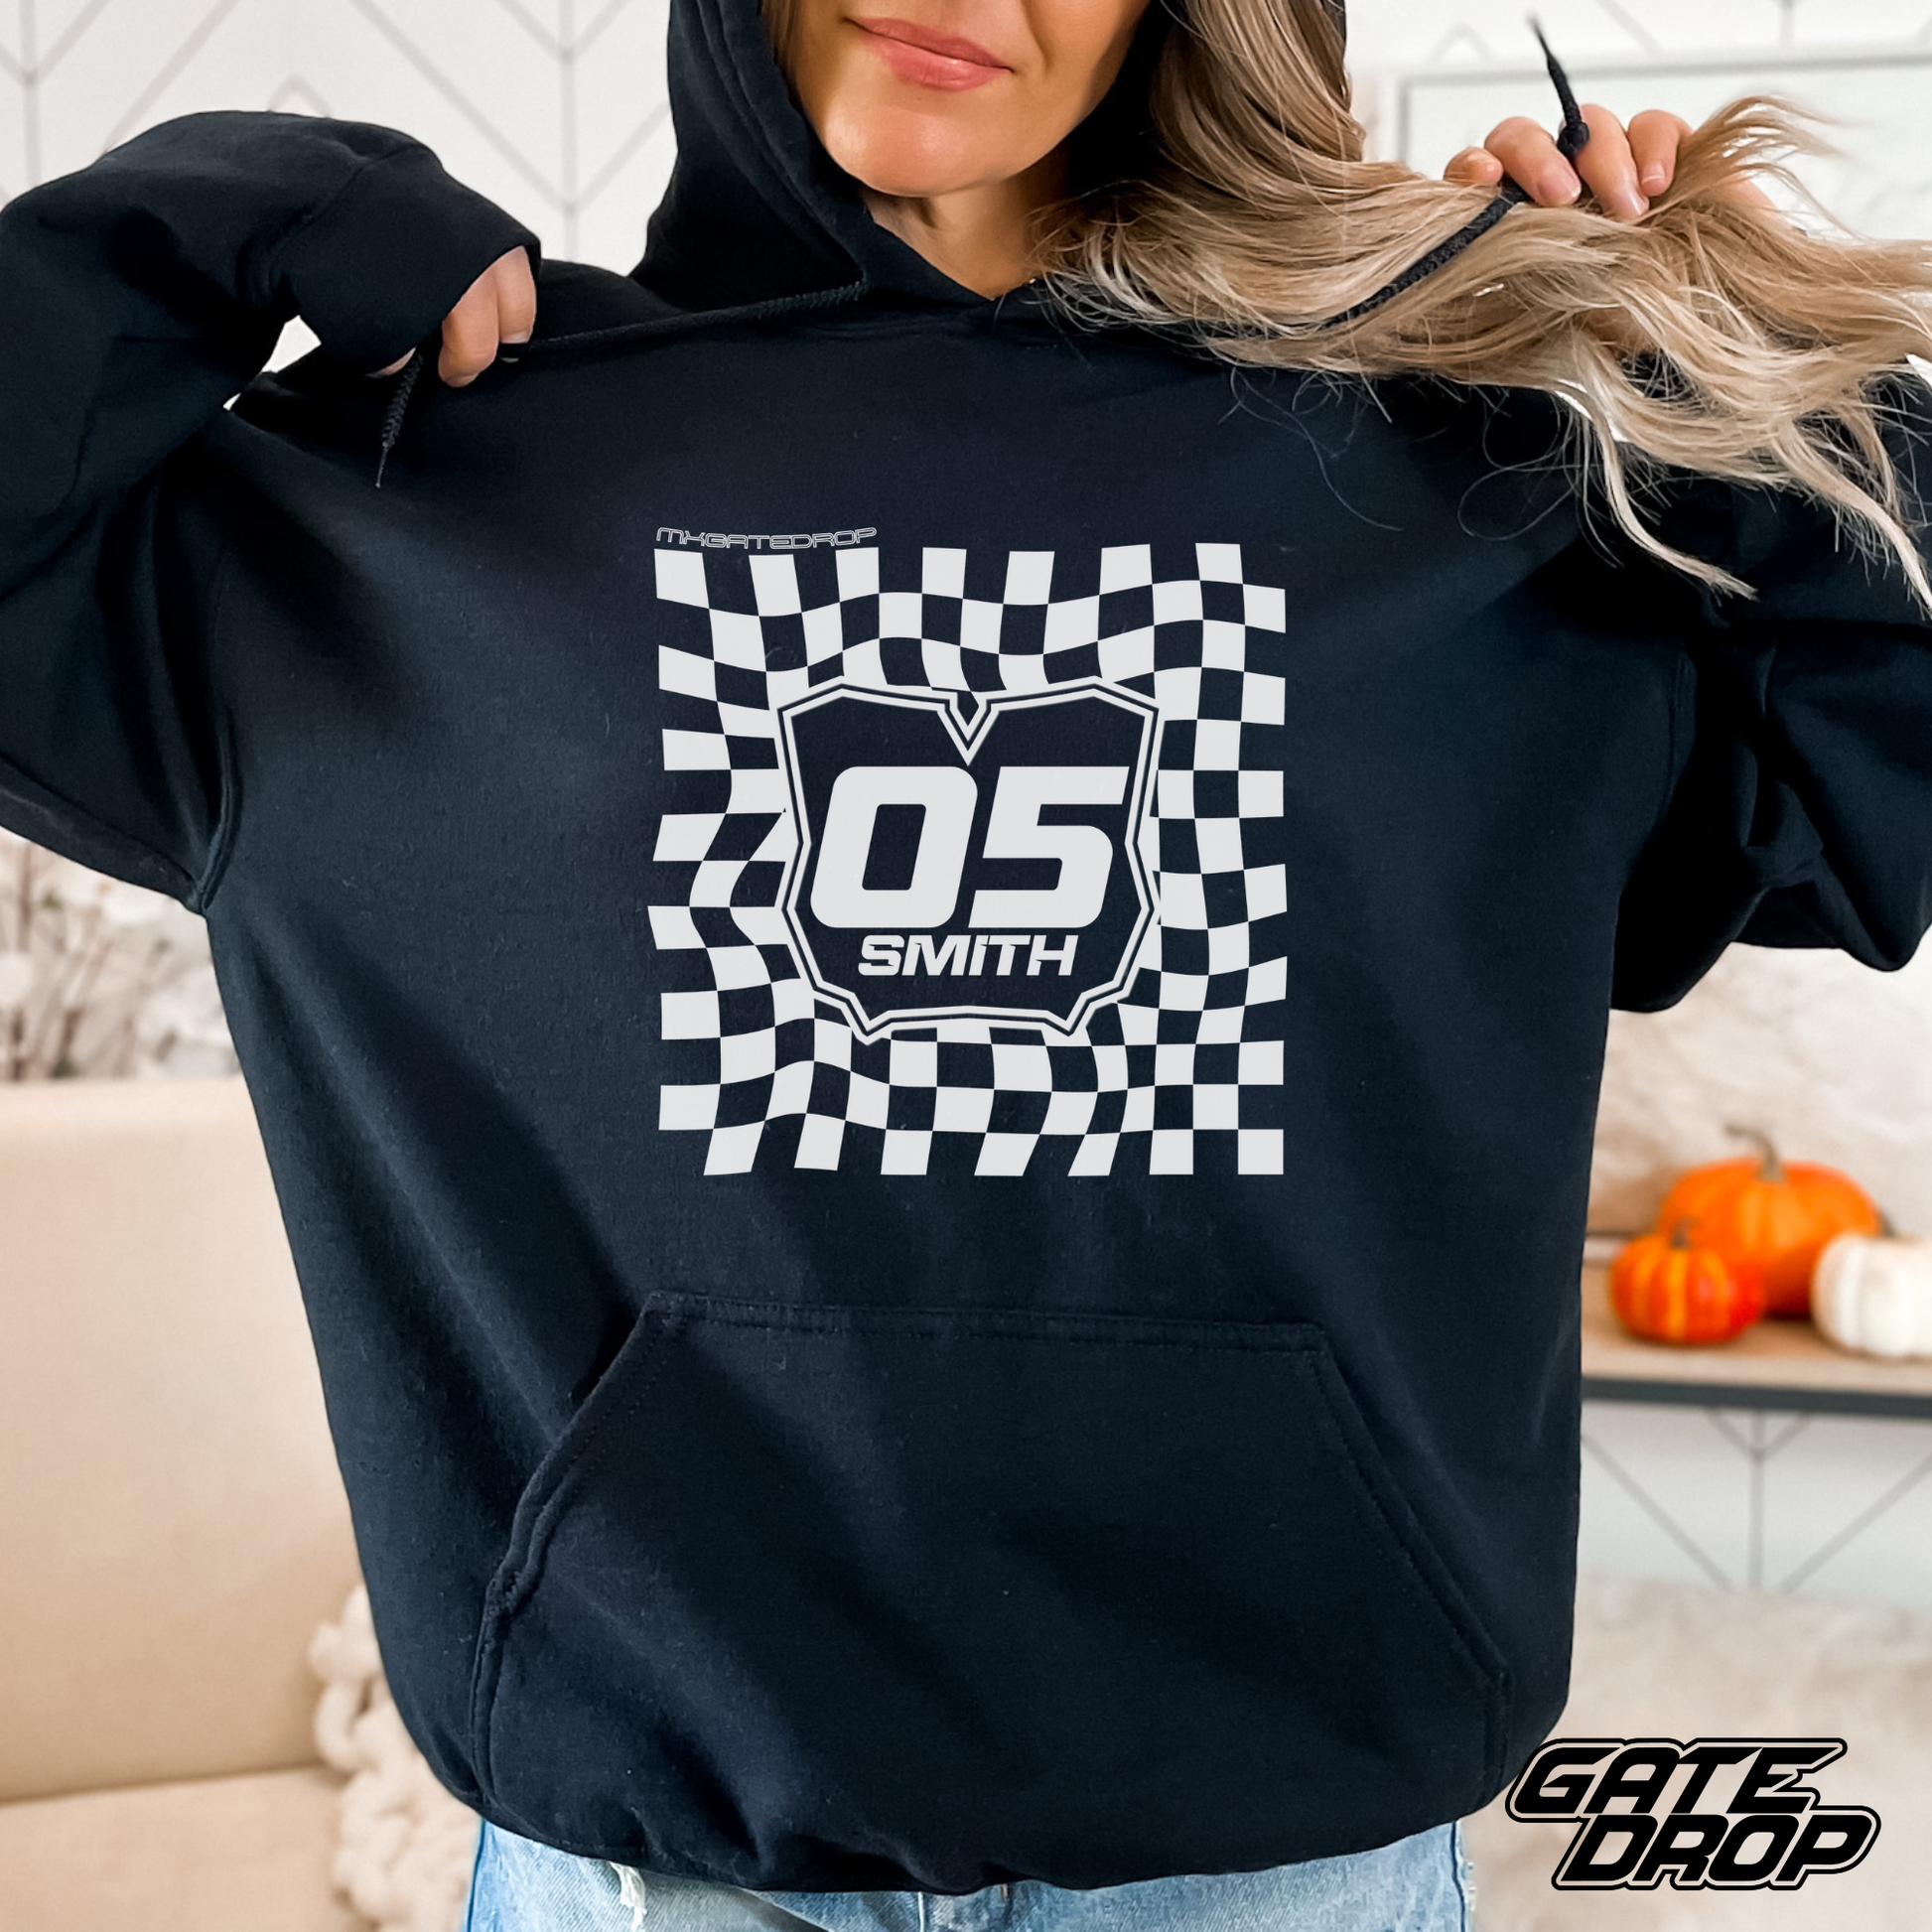 Gate Drop Personalized Checkered Adult Plate Hoodie